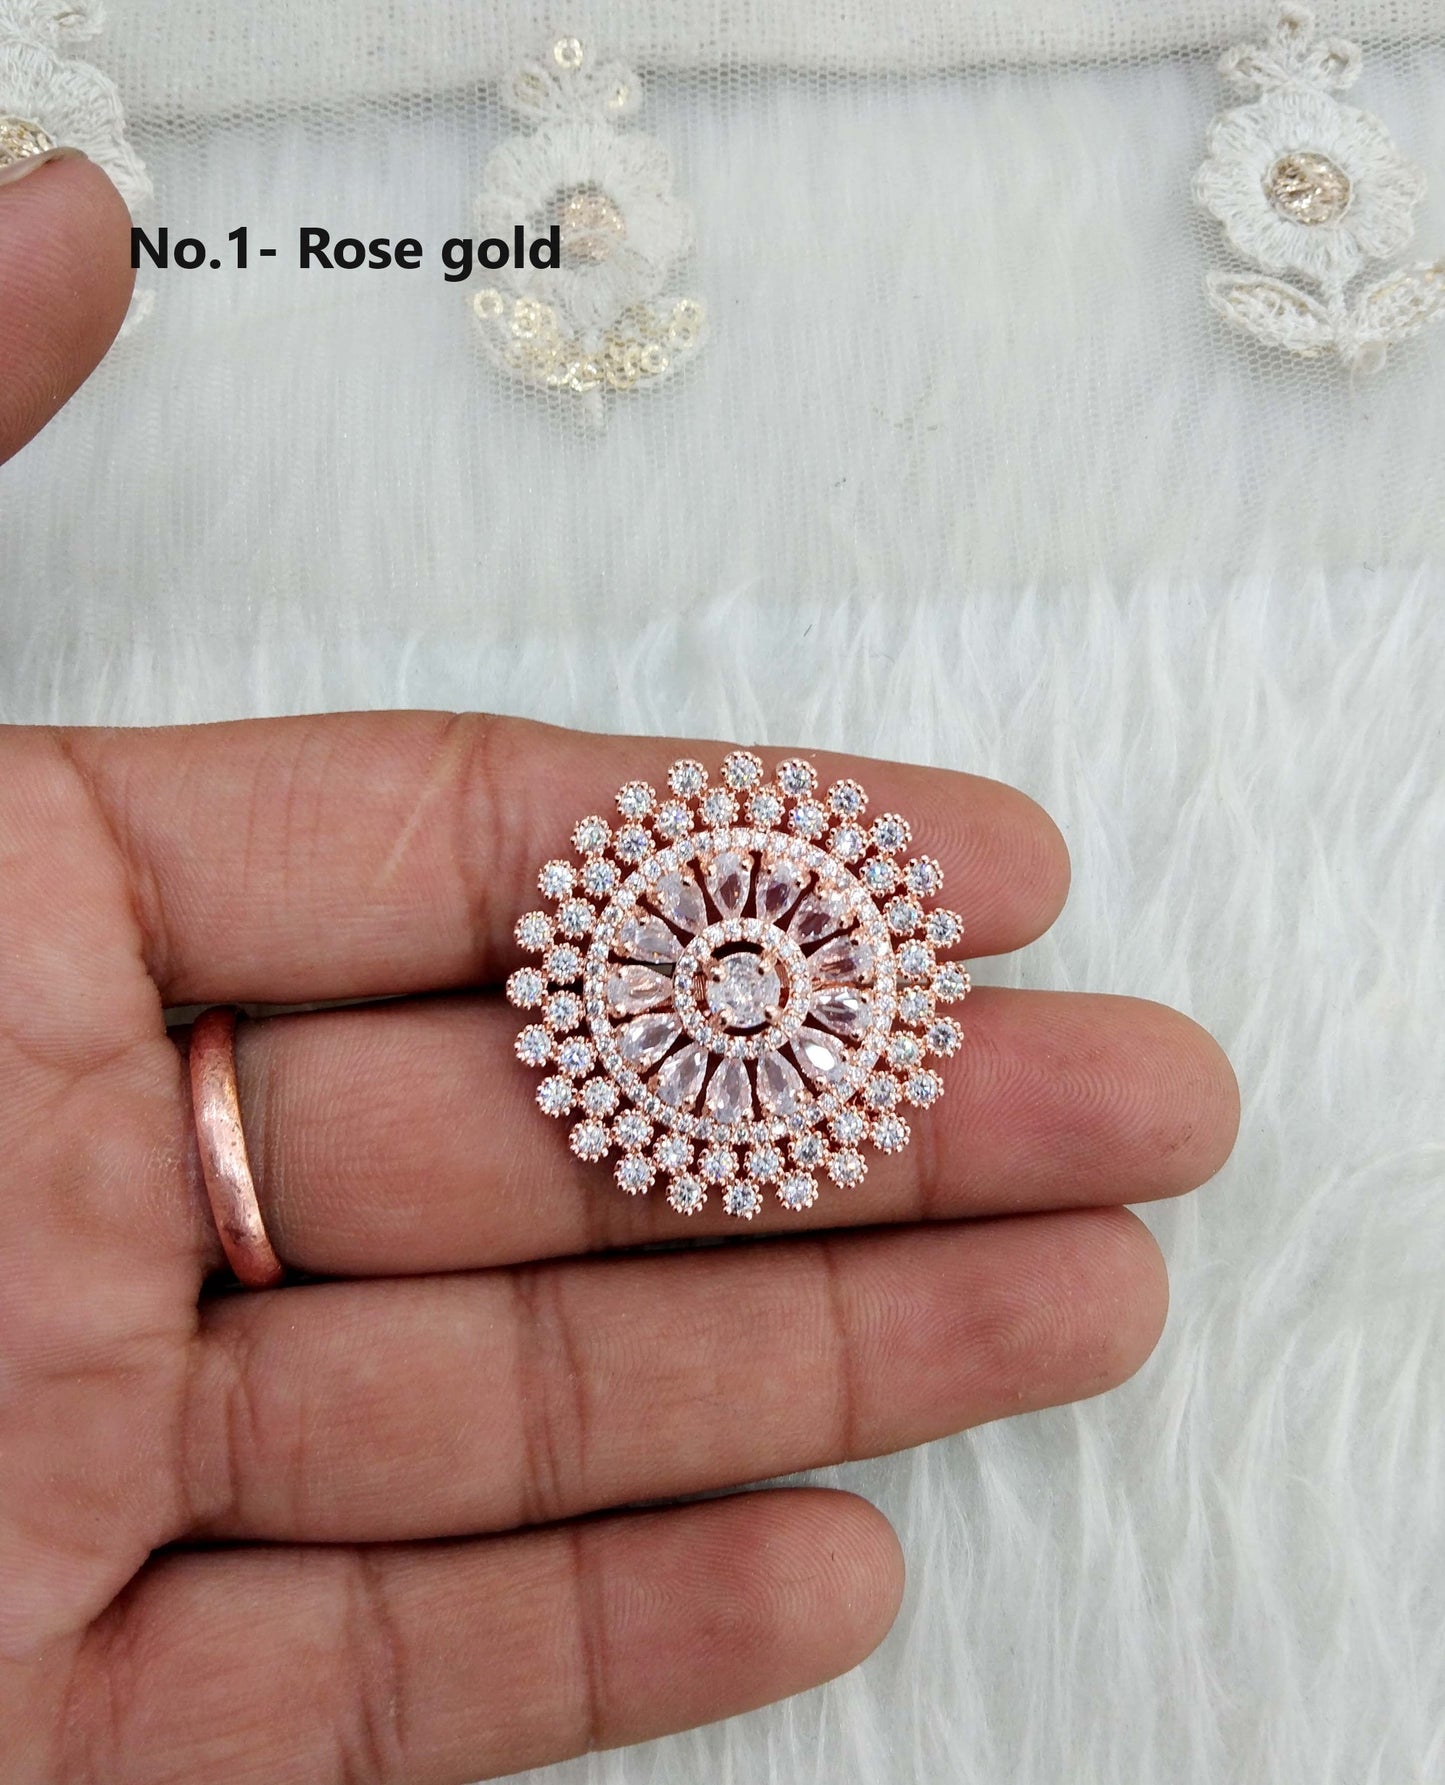 Indian Ring /Rose gold, silver finger rings Big round bridal rings hand accessory